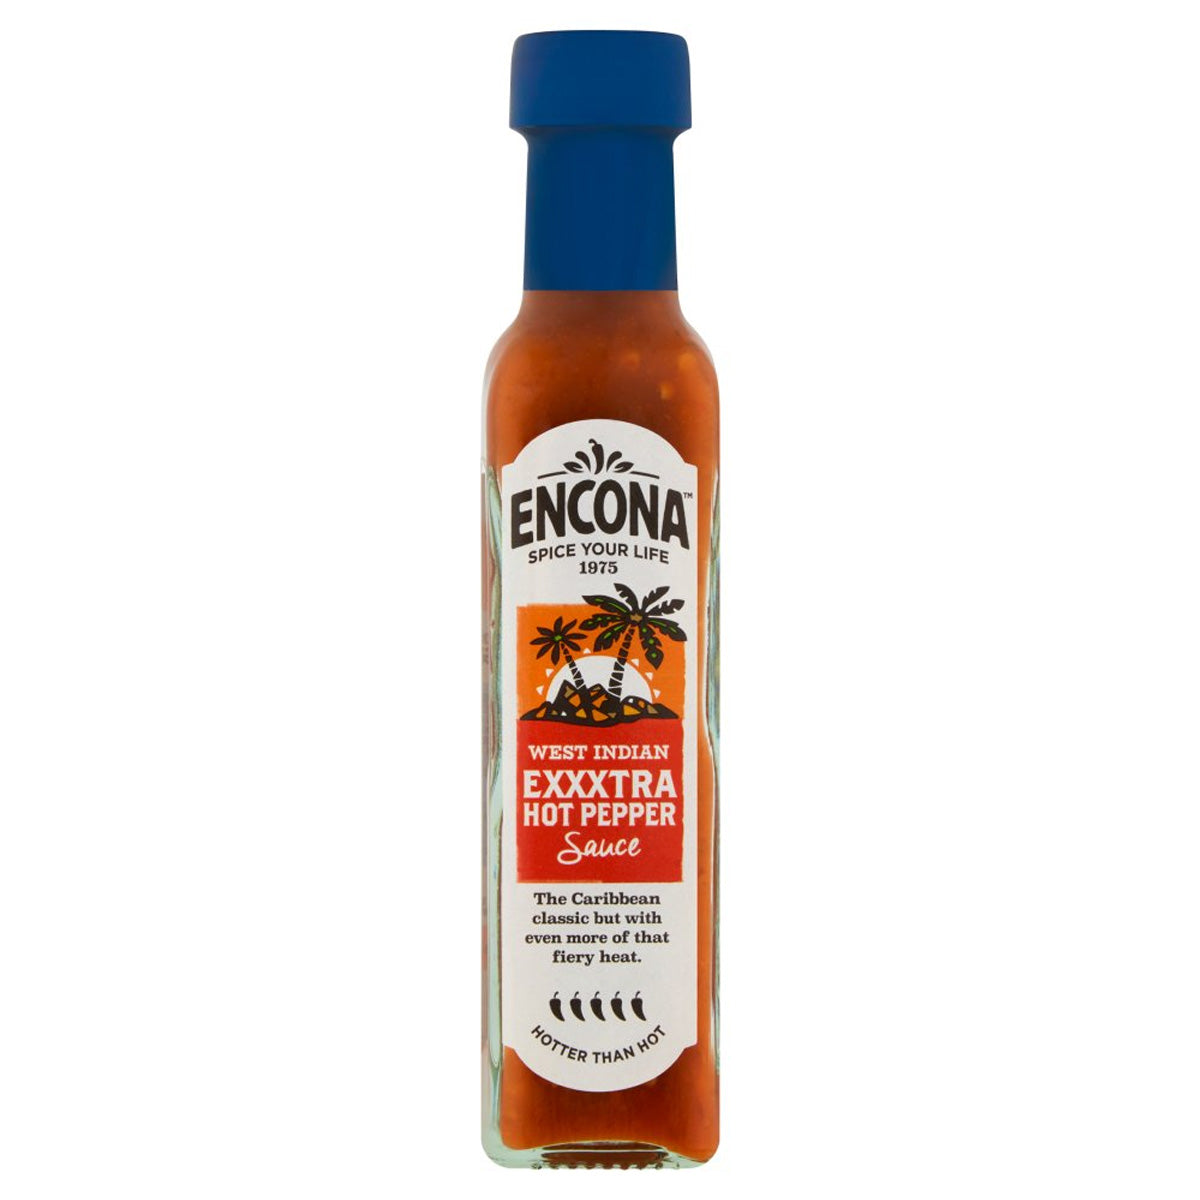 A bottle of Encona - West Indian Exxxtra Hot Pepper Sauce - 142ml on a white background.